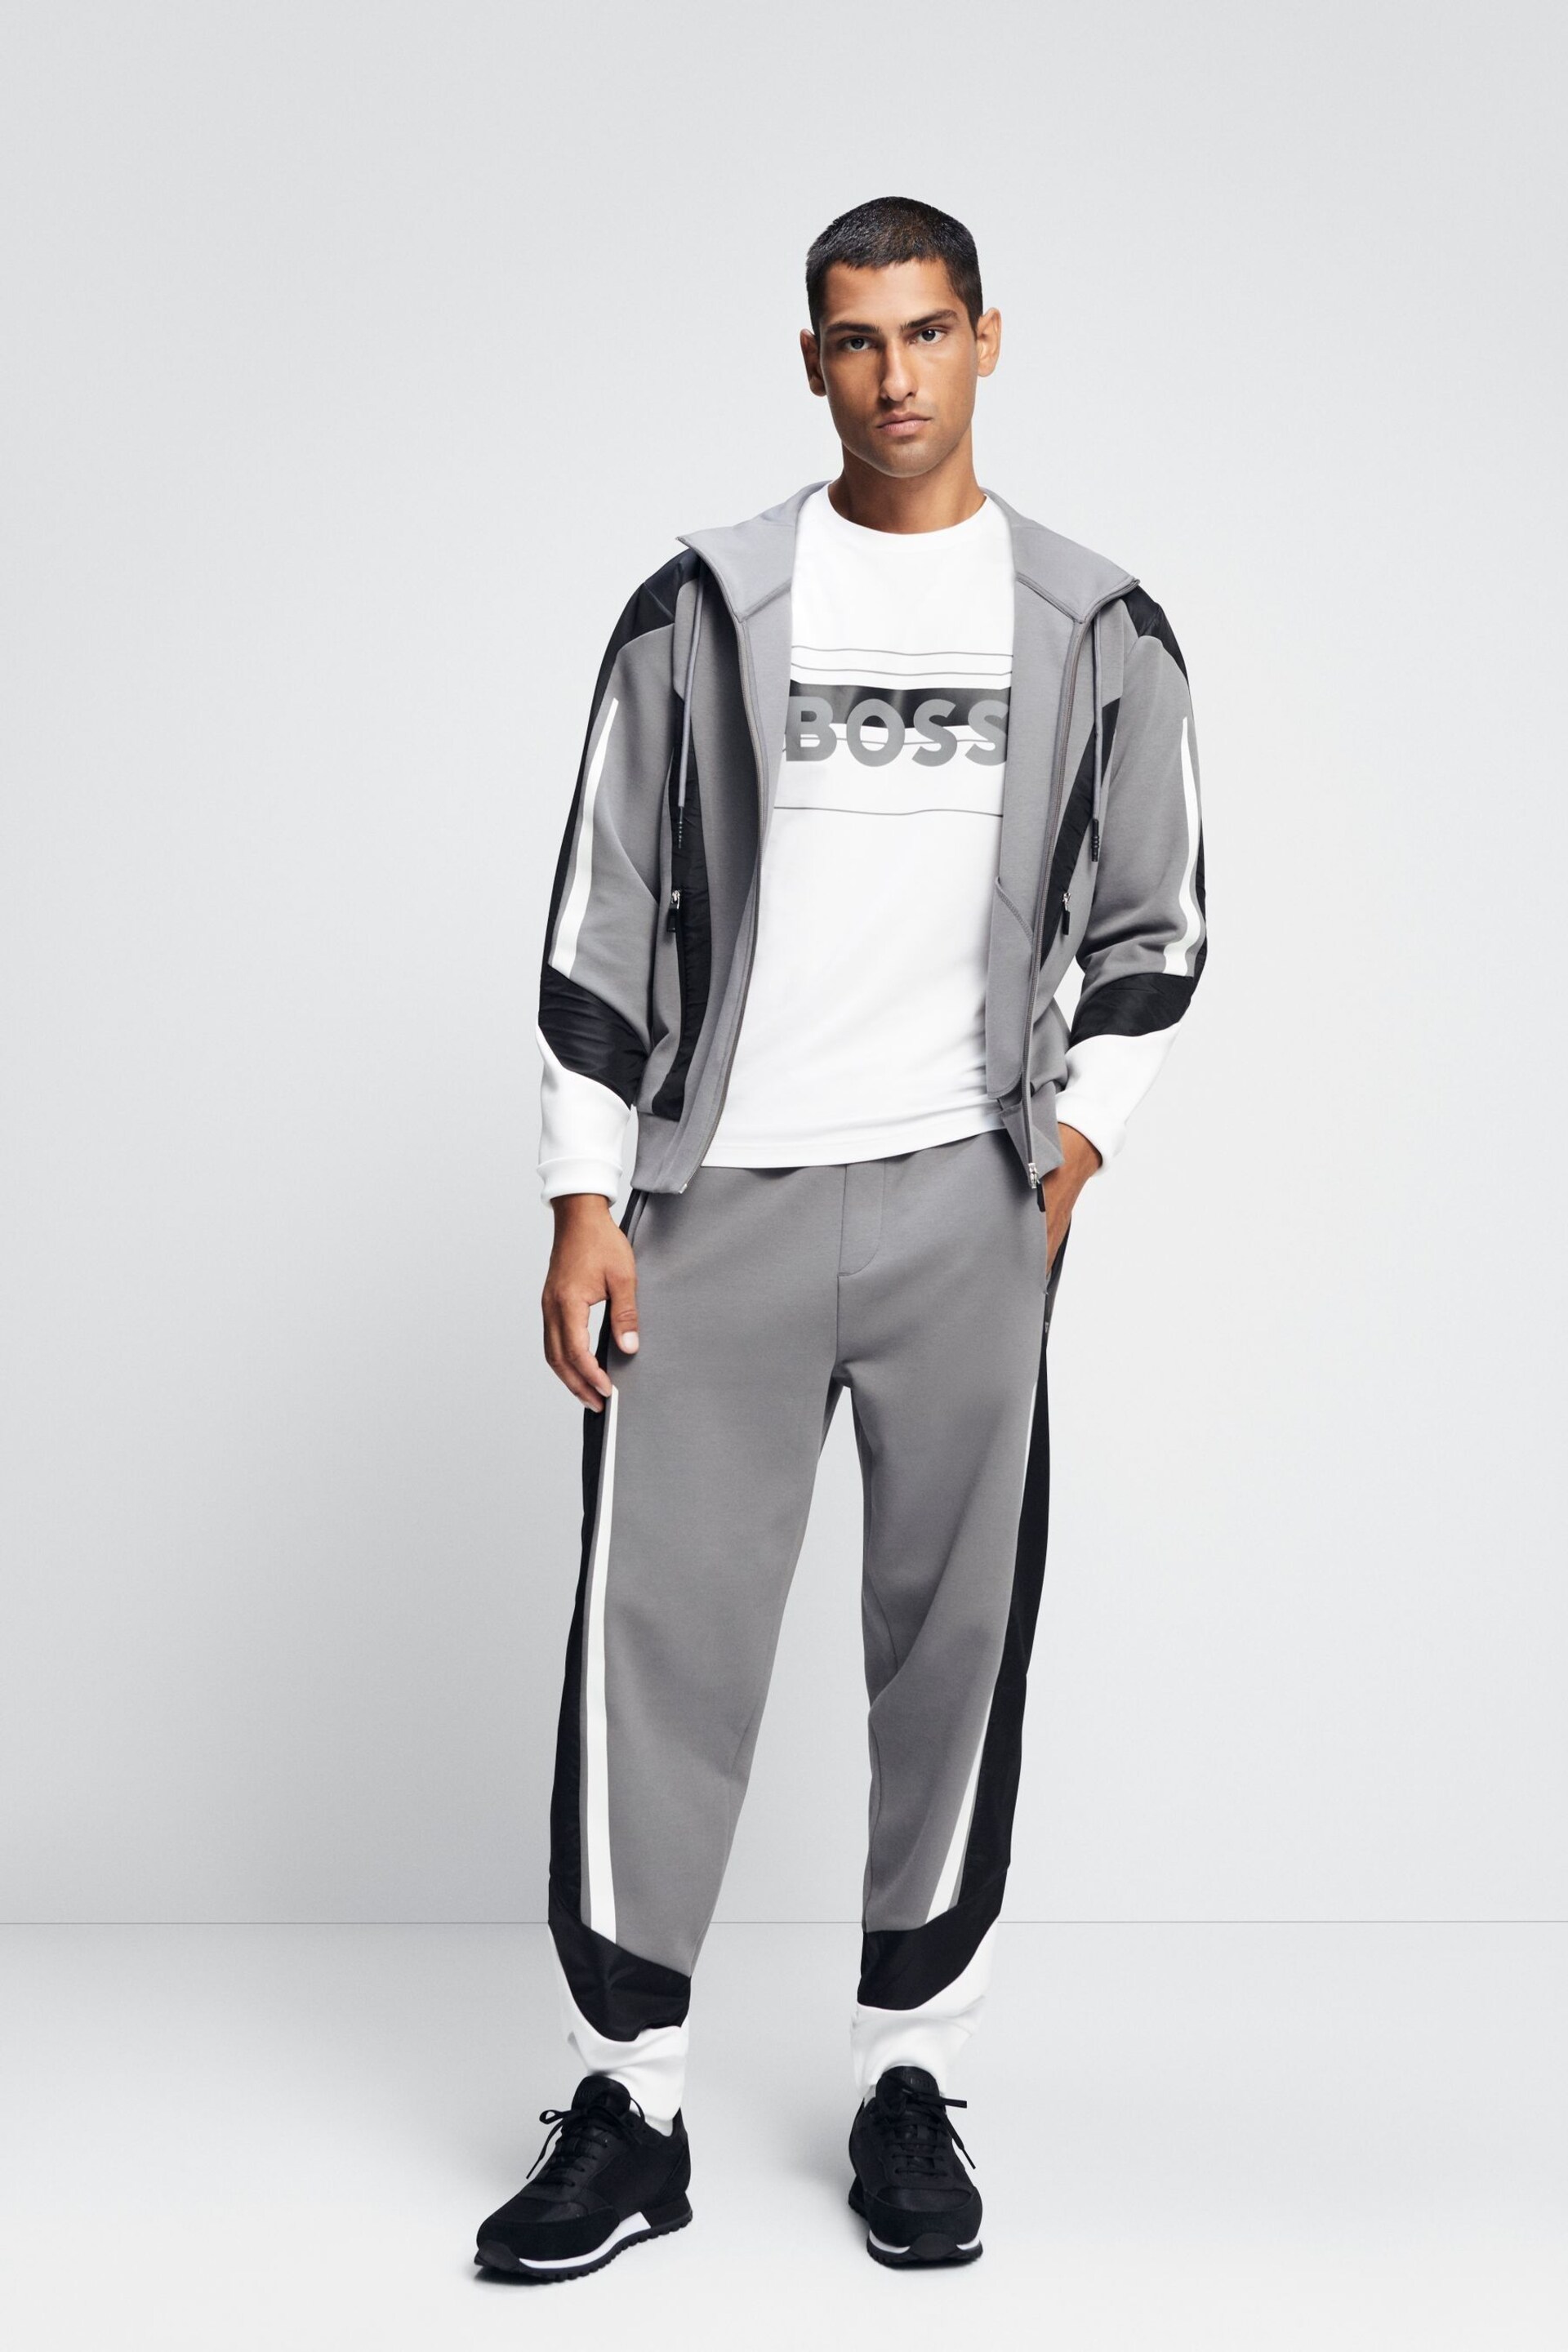 BOSS Grey Relaxed Fit Contrast Panel Sporty Joggers - Image 1 of 7